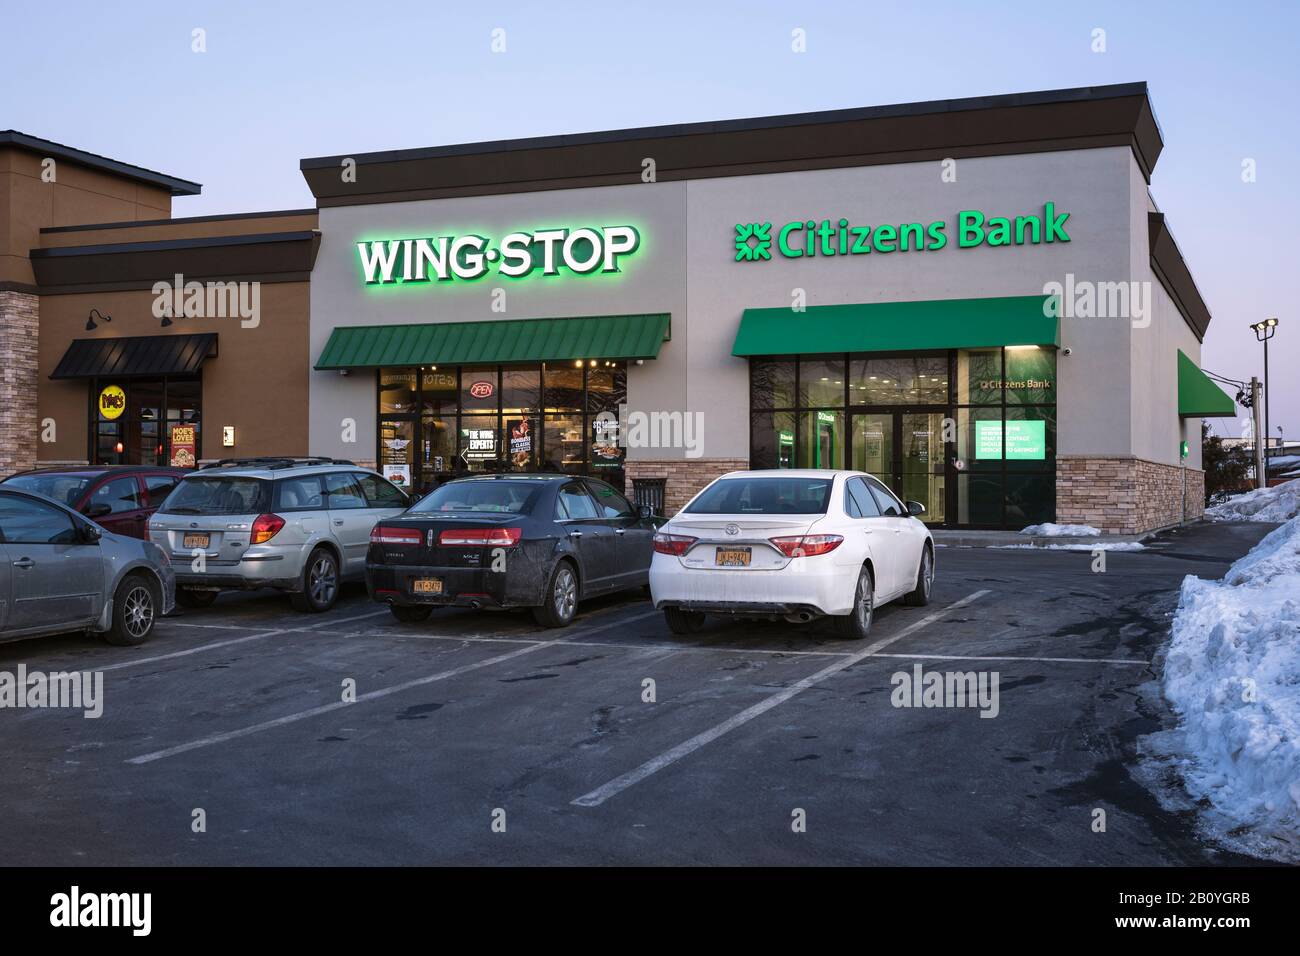 Utica, New York - Feb 21, 2020: Evening view of Citizens Bank and Wing Stop Restaurant, Casual counter-serve chain serving a variety of chicken wings Stock Photo